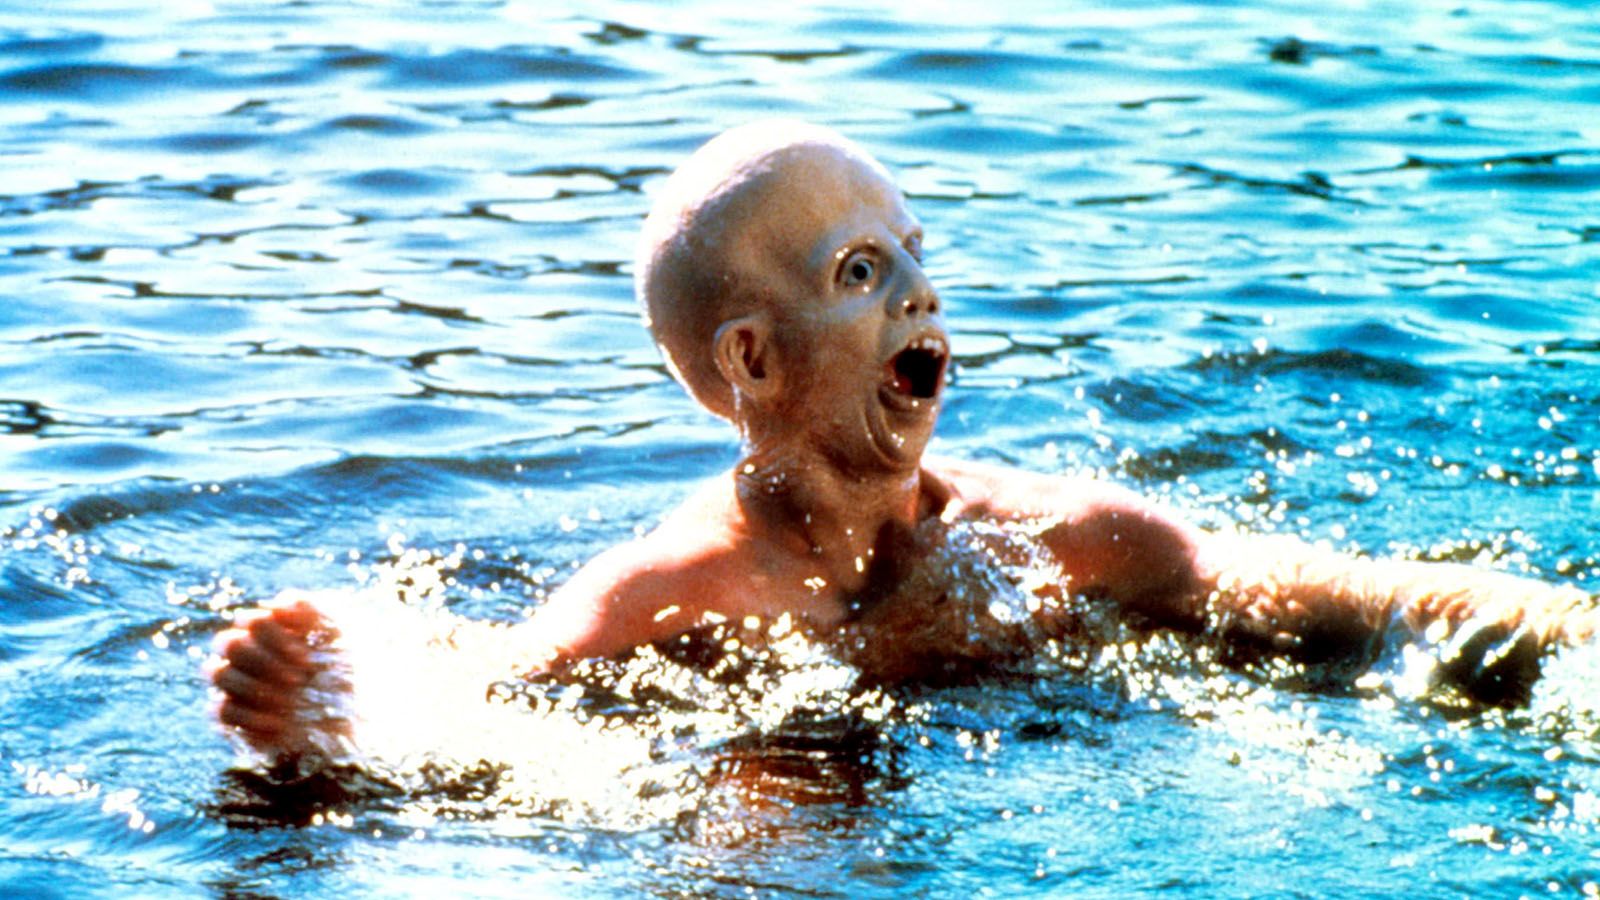 Embassy Theatre will show Friday the 13th on Oct. 21 with actor Ari Lehman performing with his band afterwards.